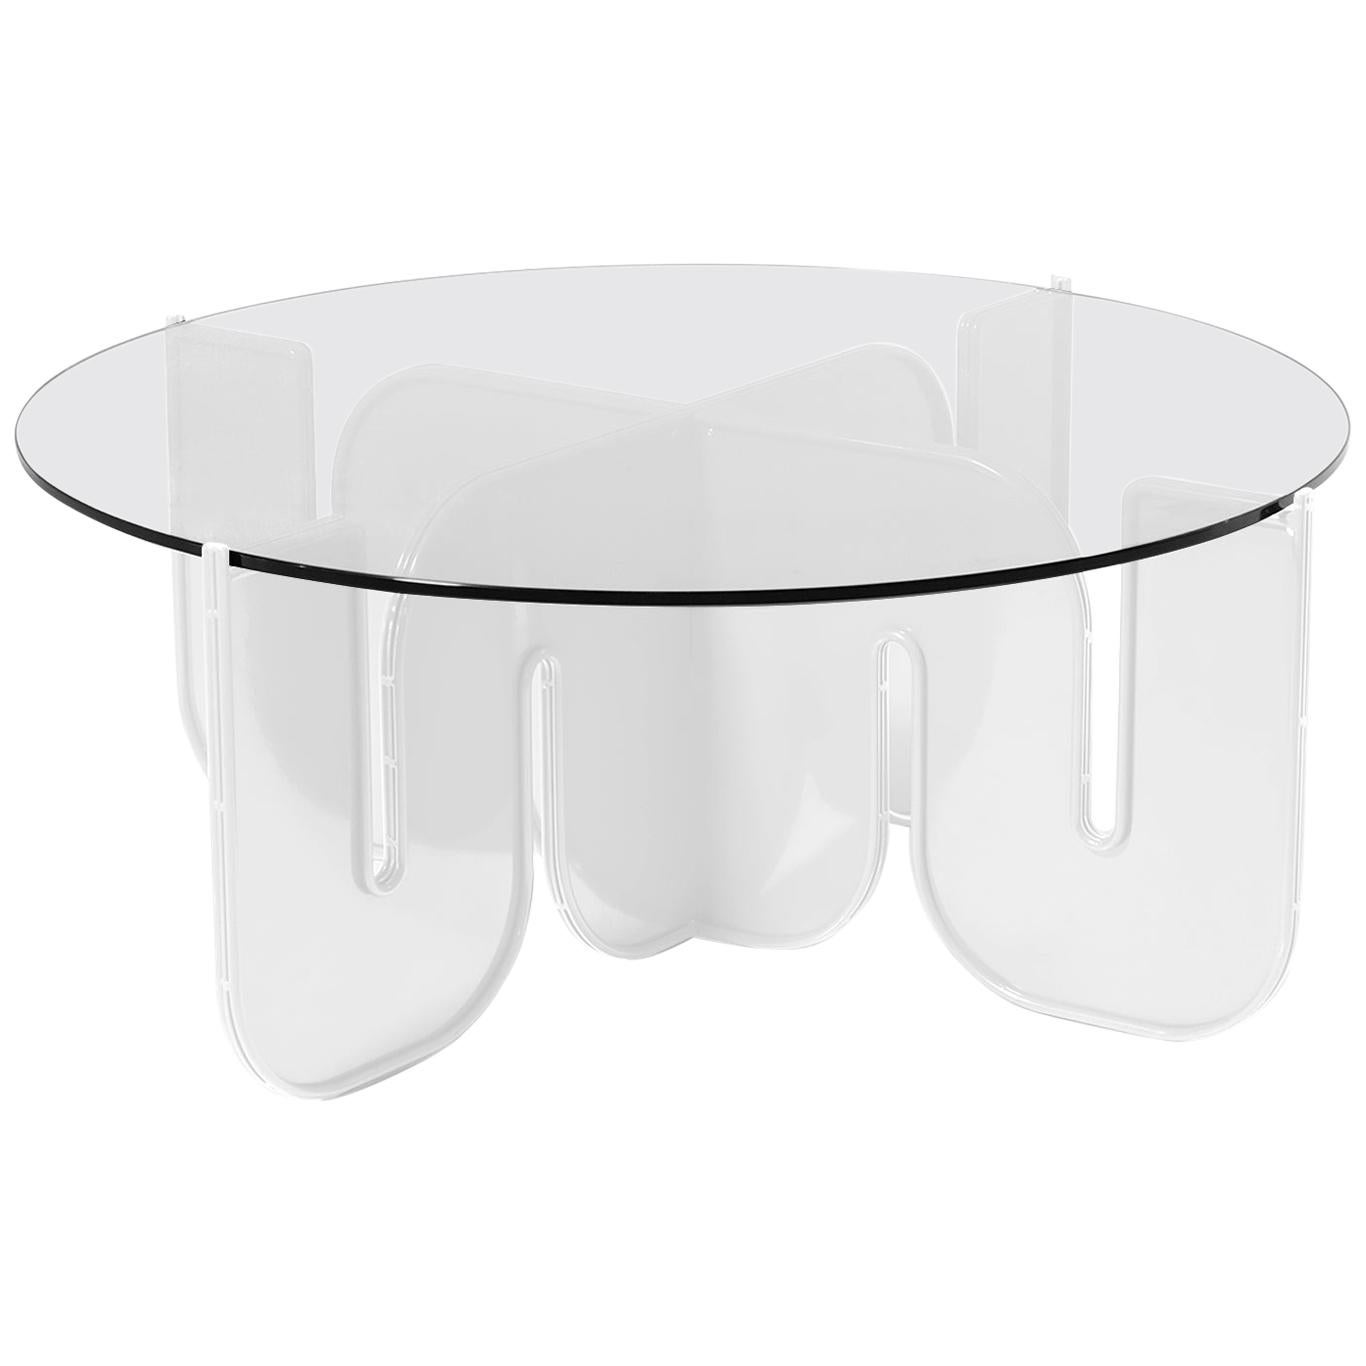 Modern Coffee Table, Minimalist Flat Pack Center Table in White, Clear Glass